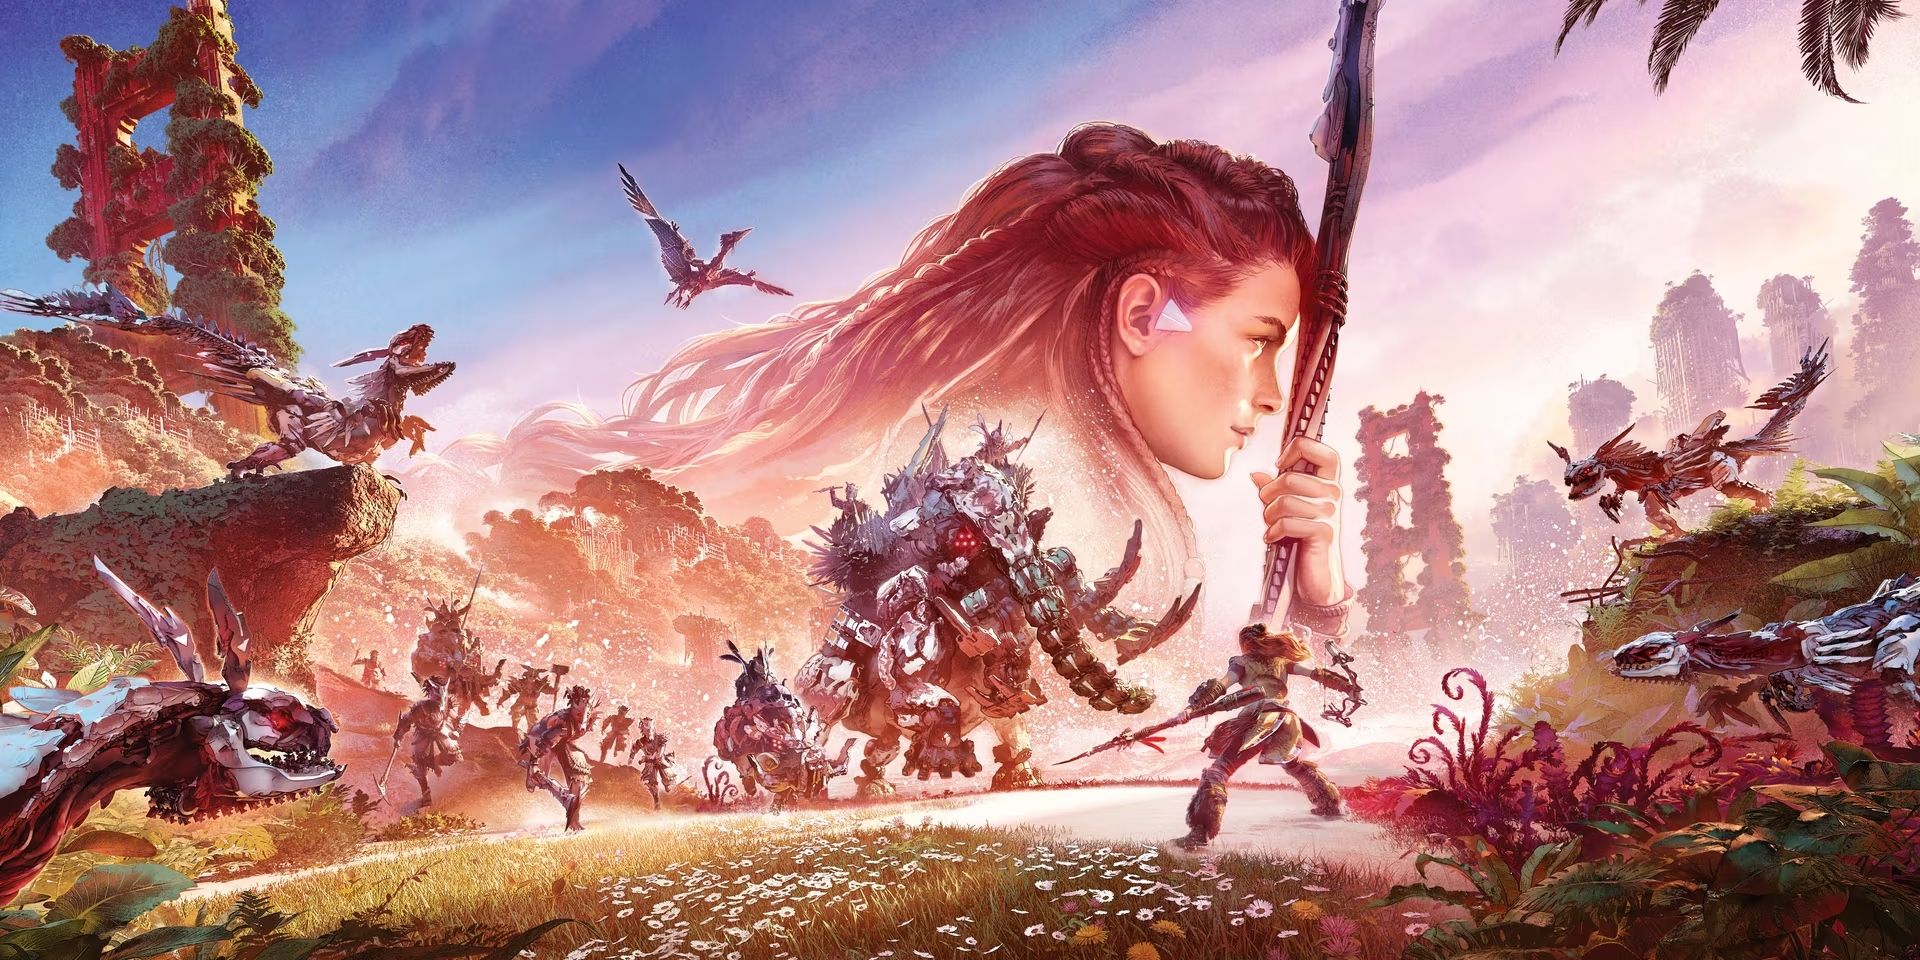 Horizon Forbidden West's key art showing Aloy facing machines in the lower part of the image, with her head in the sky while she holds her spear.